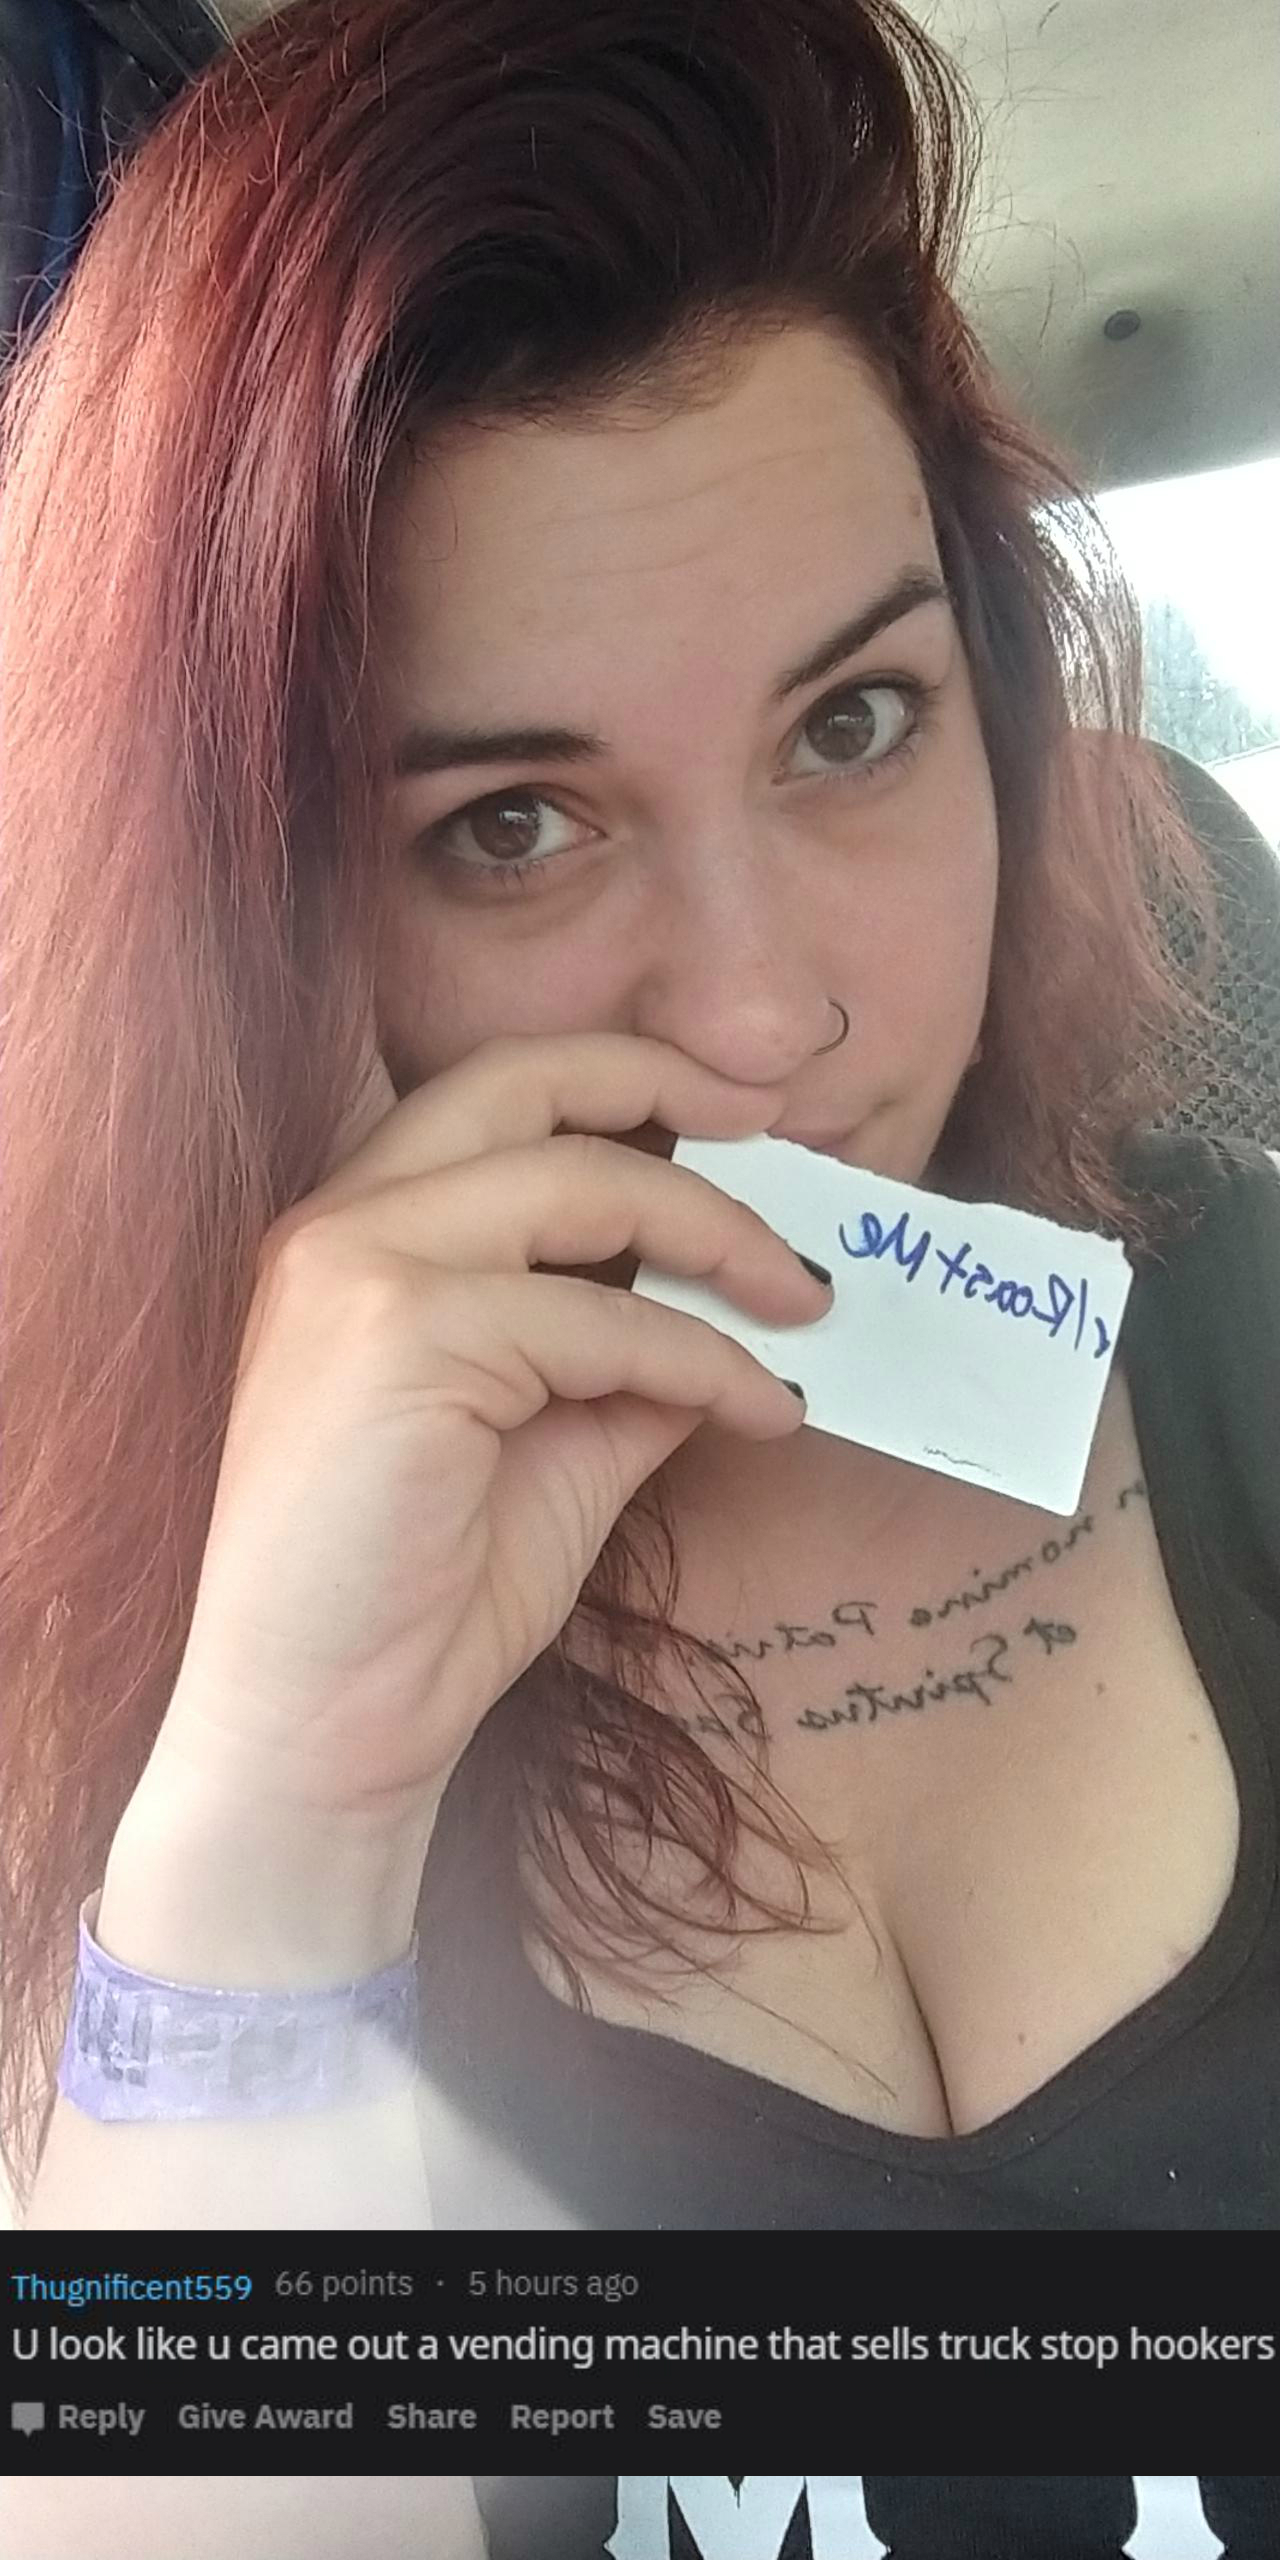 reddit roast me -u came out a vending machine that sells truck stop hookers